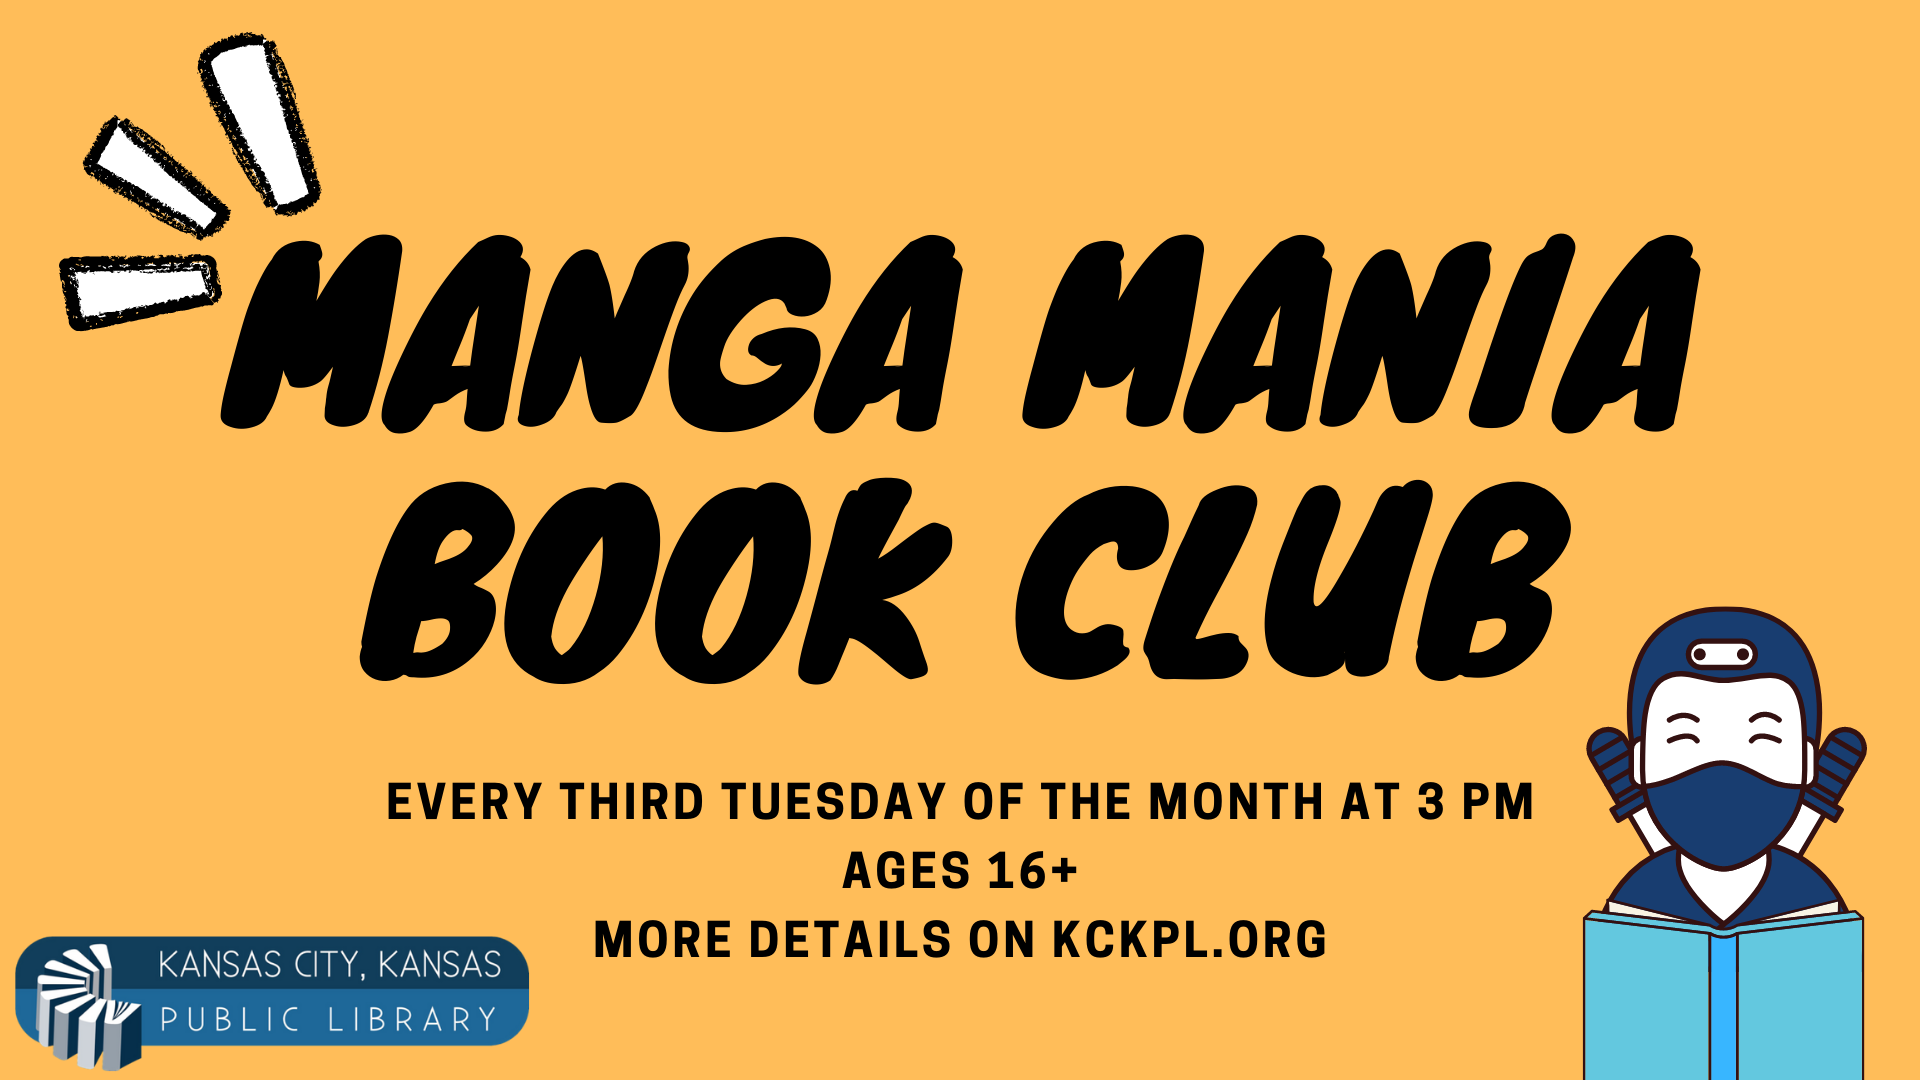 Manga Mania Book Club, Every third Tuesday of the month at 3 pm, ages 16 and up, register on kckpl.org